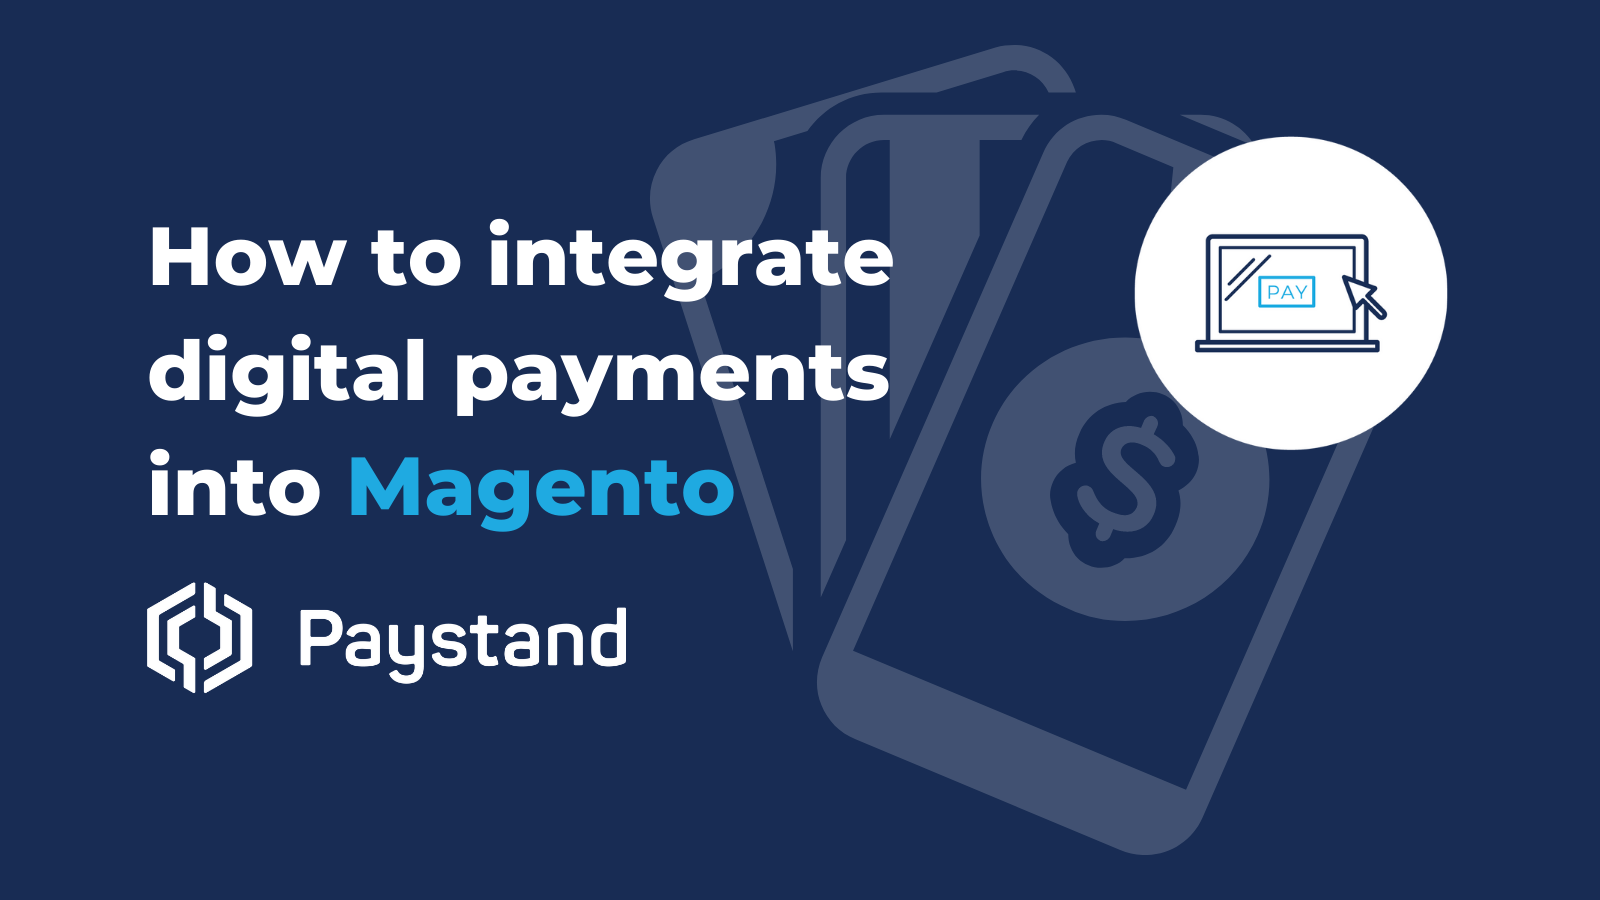 How to Integrate Digital Payments into Magneto